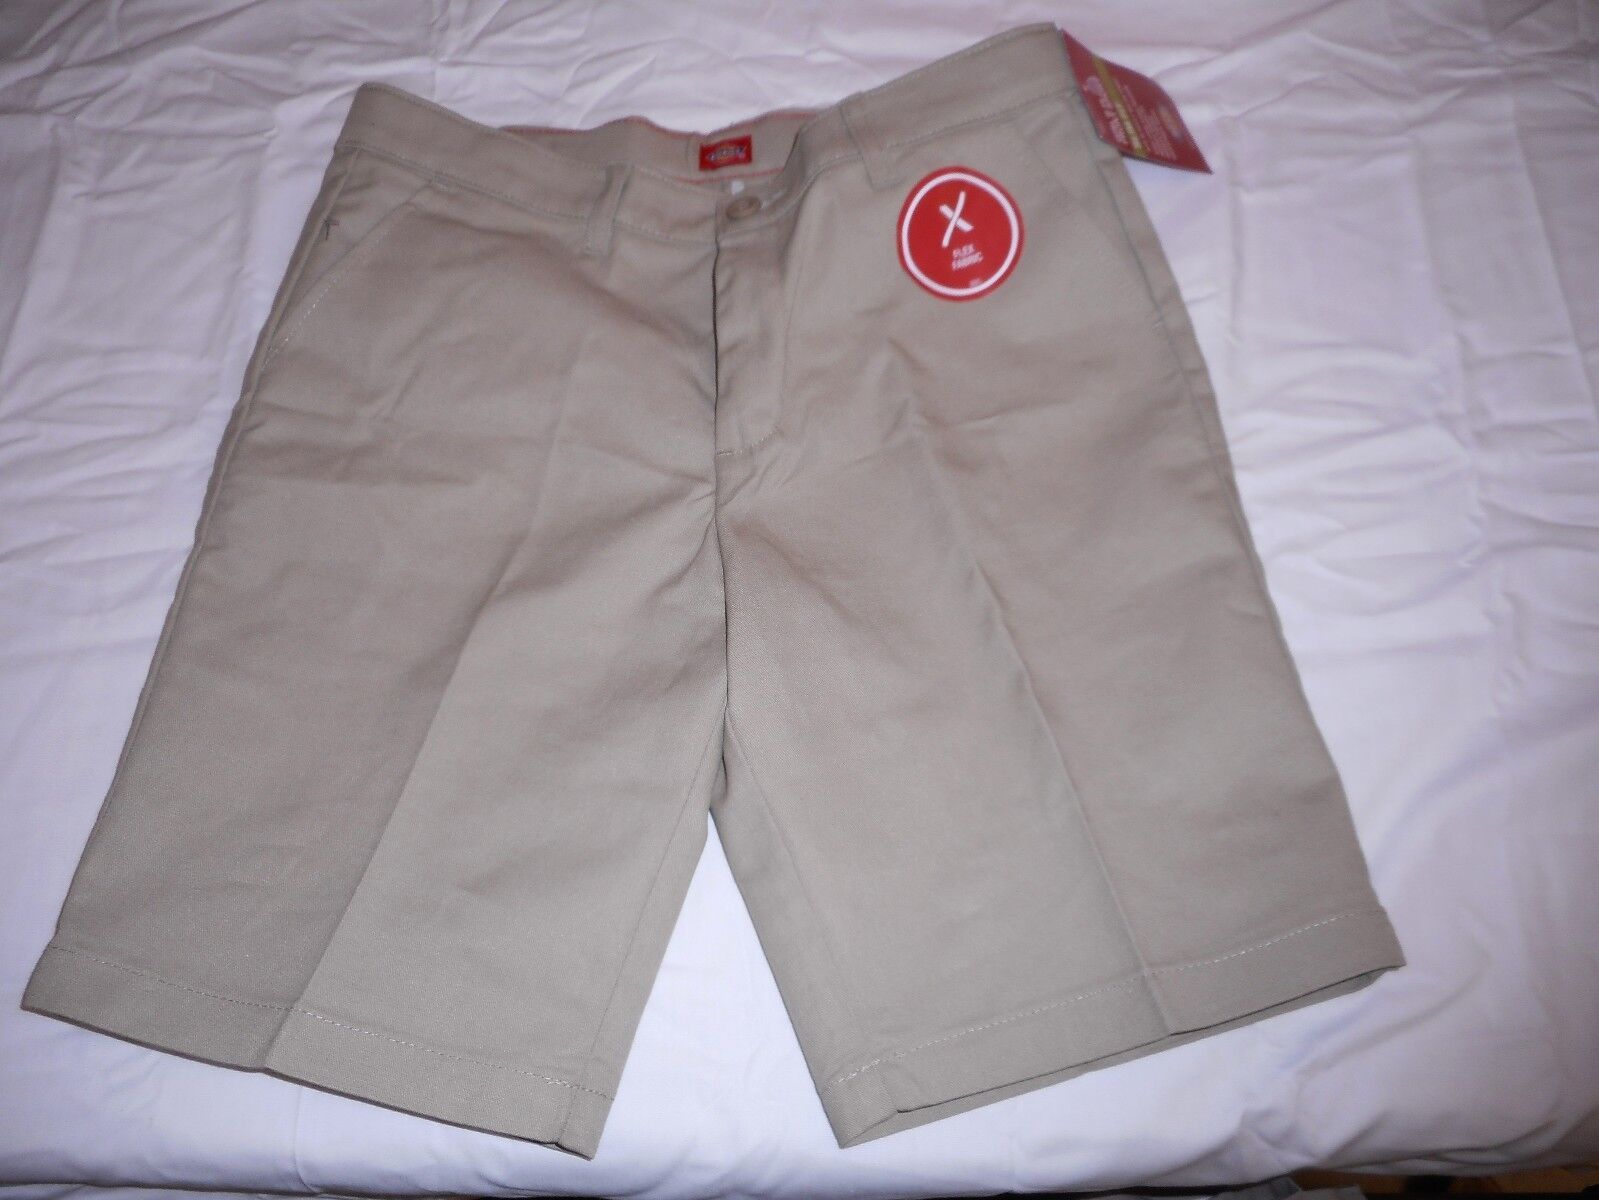 Primary image for Girls Dickies Flat Front Shorts Khaki Size 16 Slim Fit NEW W TAGS